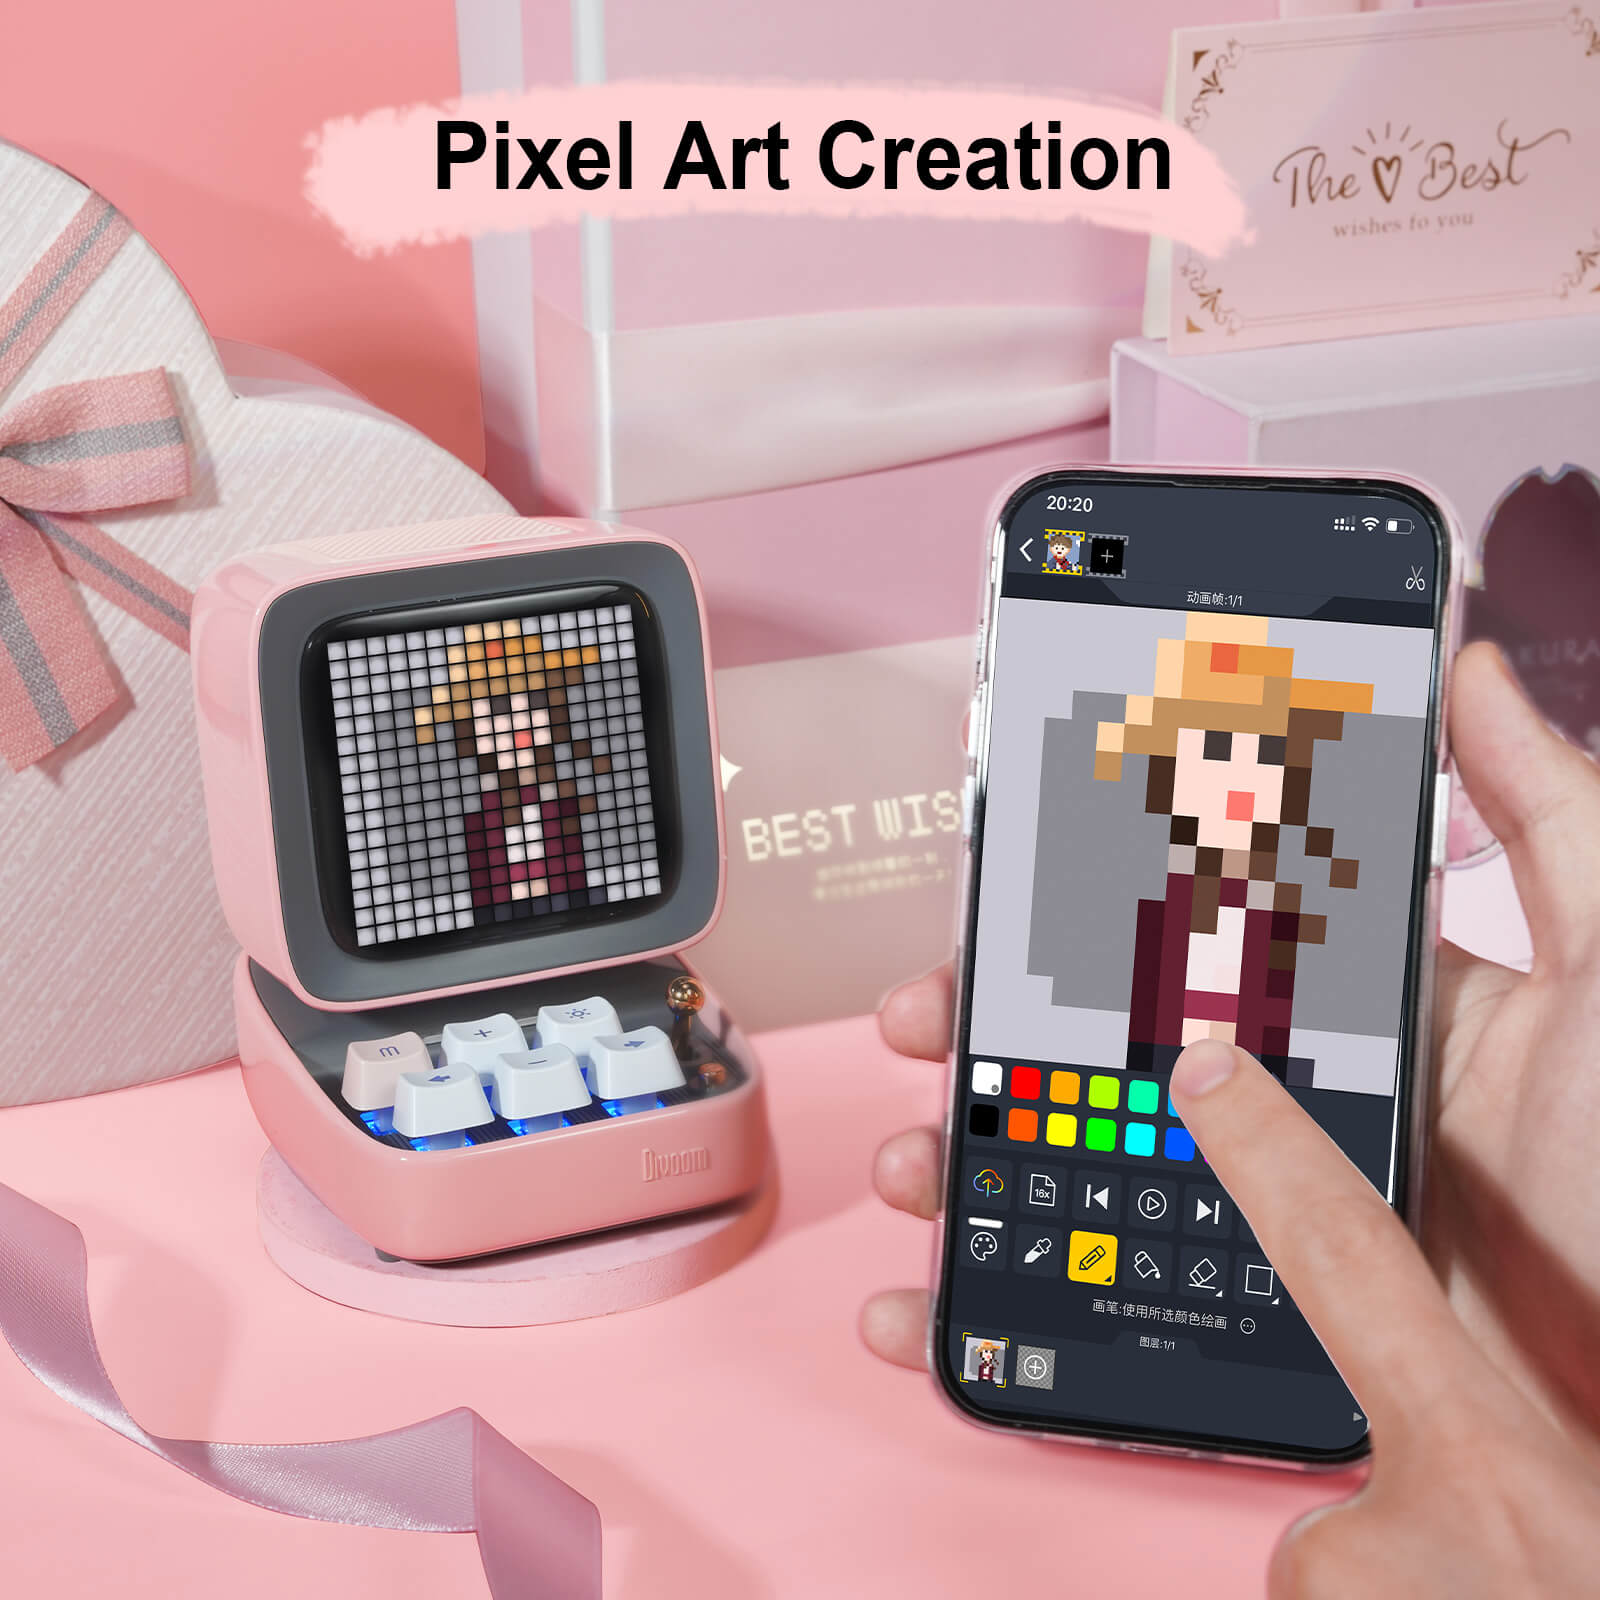 Pixel screen for creation